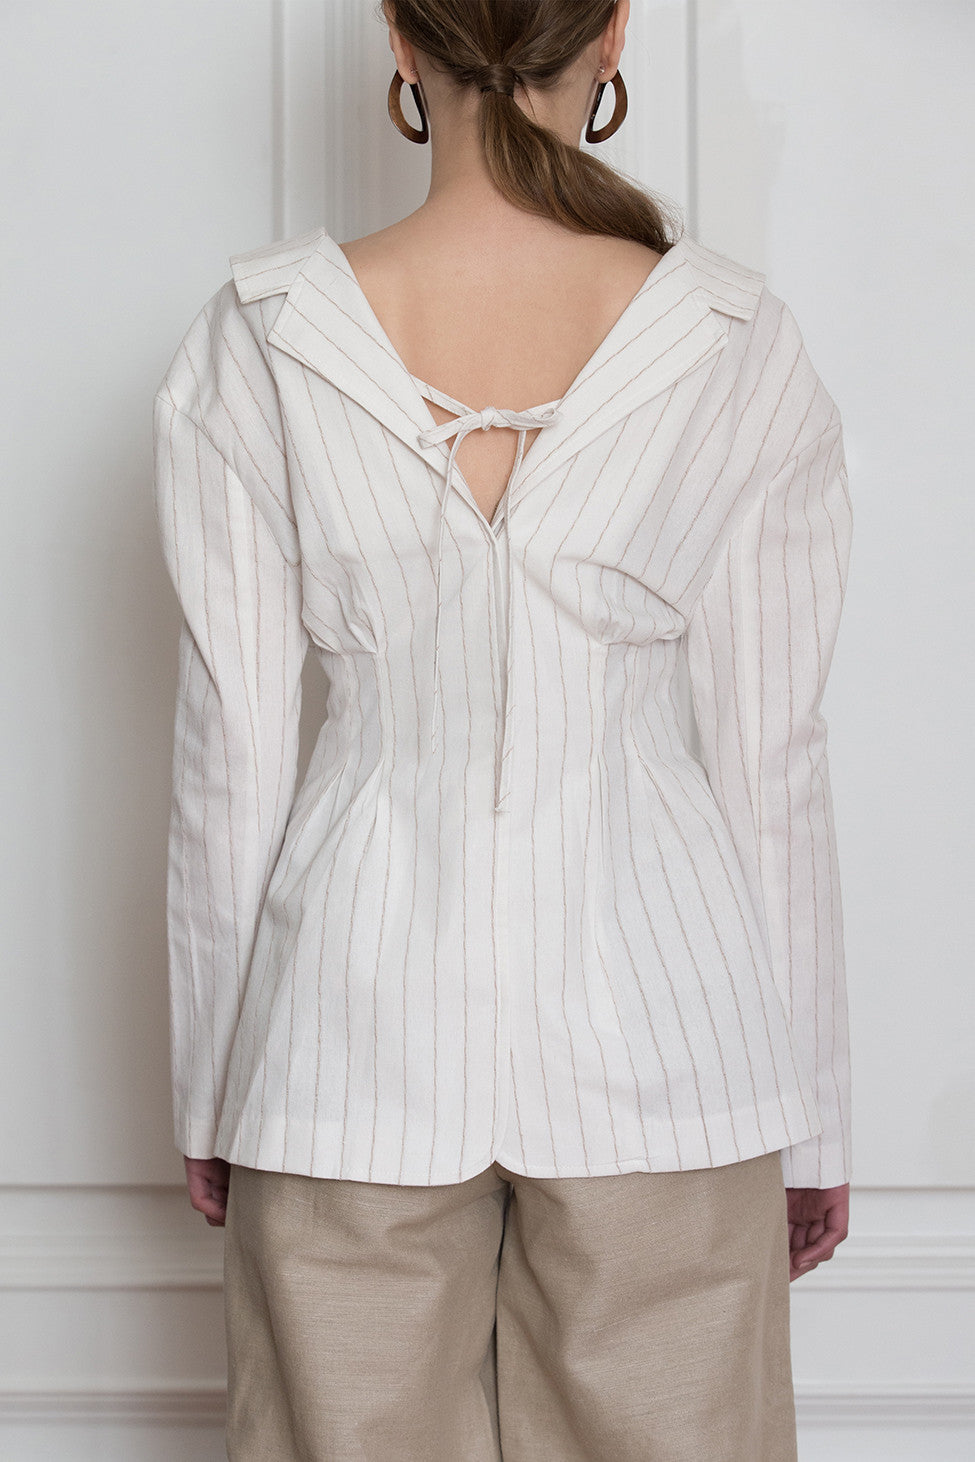 The Souris Jacket in Ivory with brown striped, featuring a-line jacket with fitted waist with one button closure, vertical pleating, open collar with back tie. Fitted at waist.